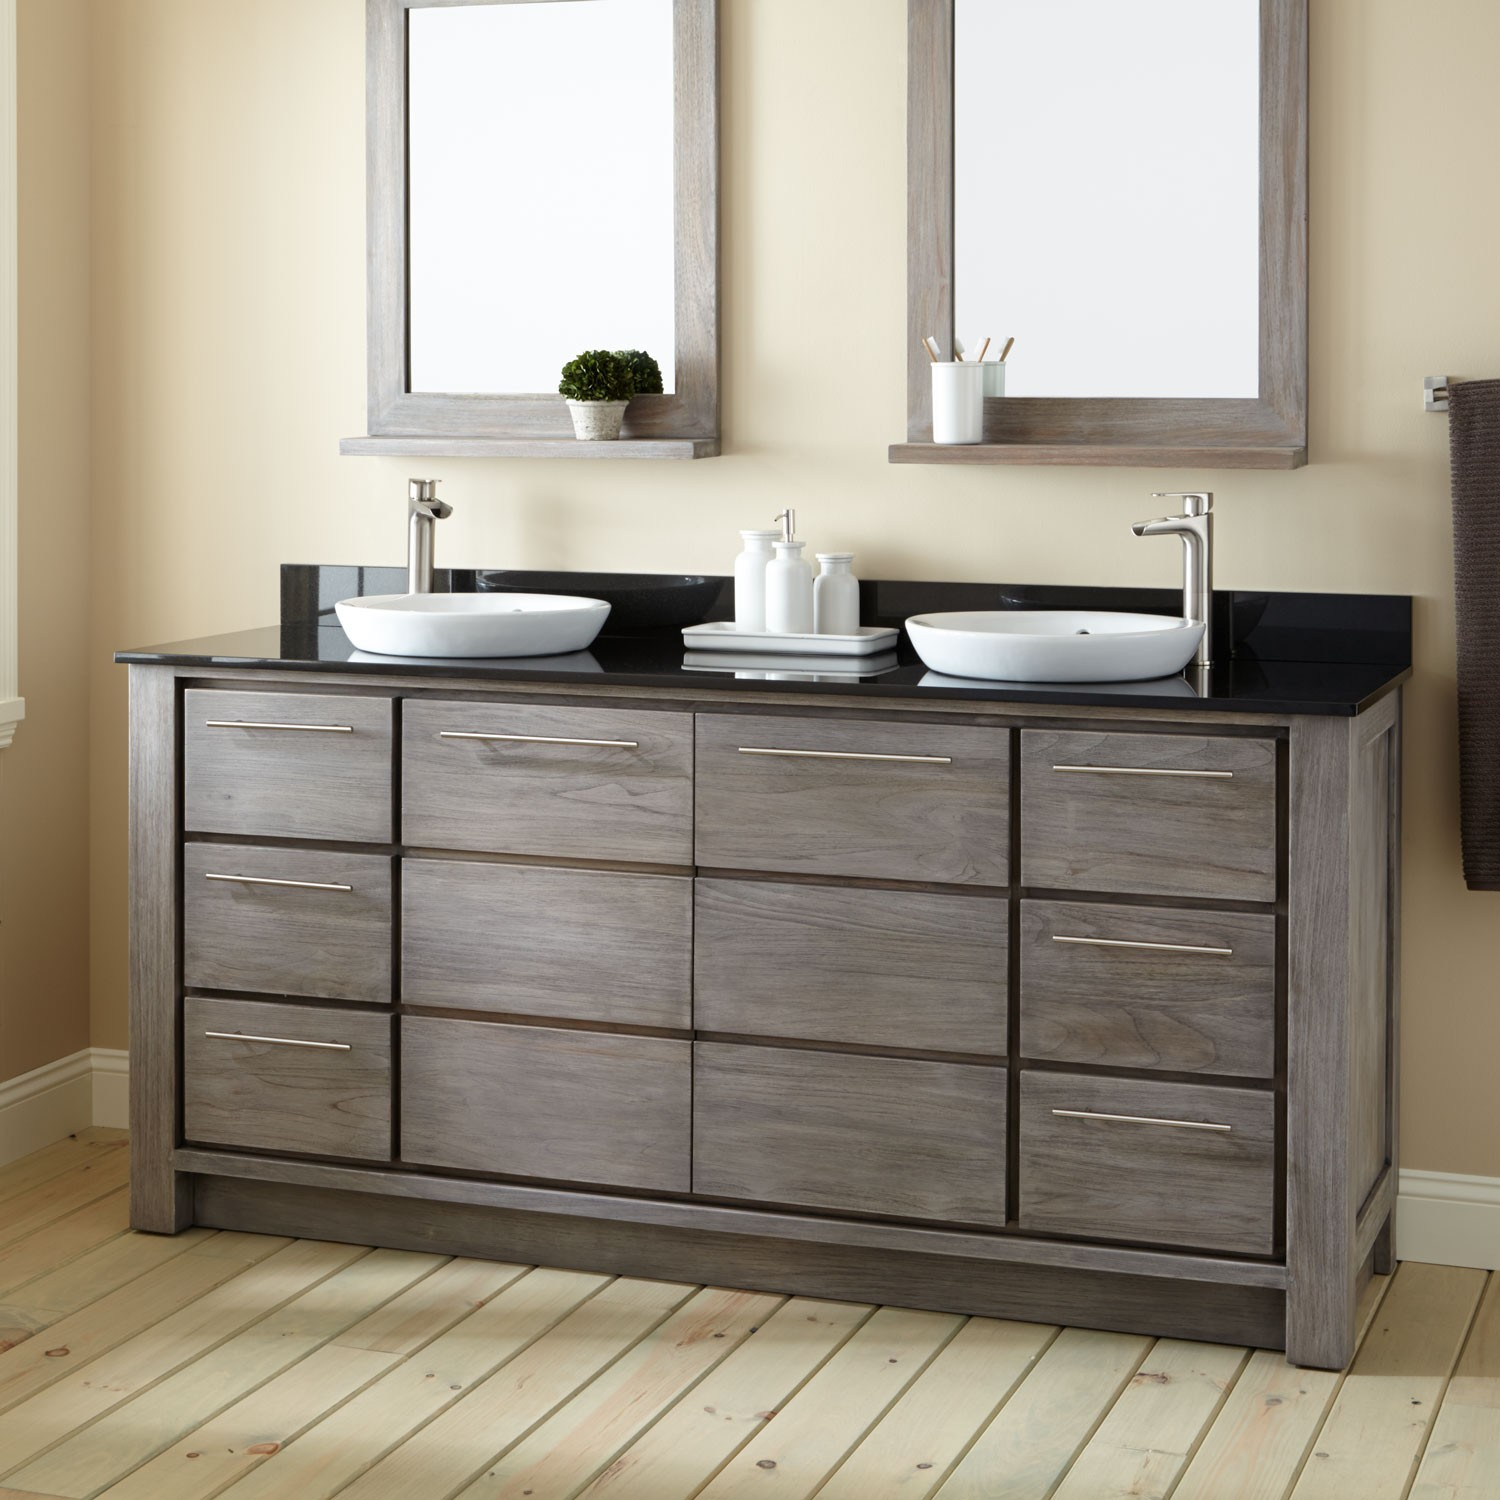 Bathroom Double Sink Bathroom Vanities And Cabinets Inspoirational with dimensions 1500 X 1500